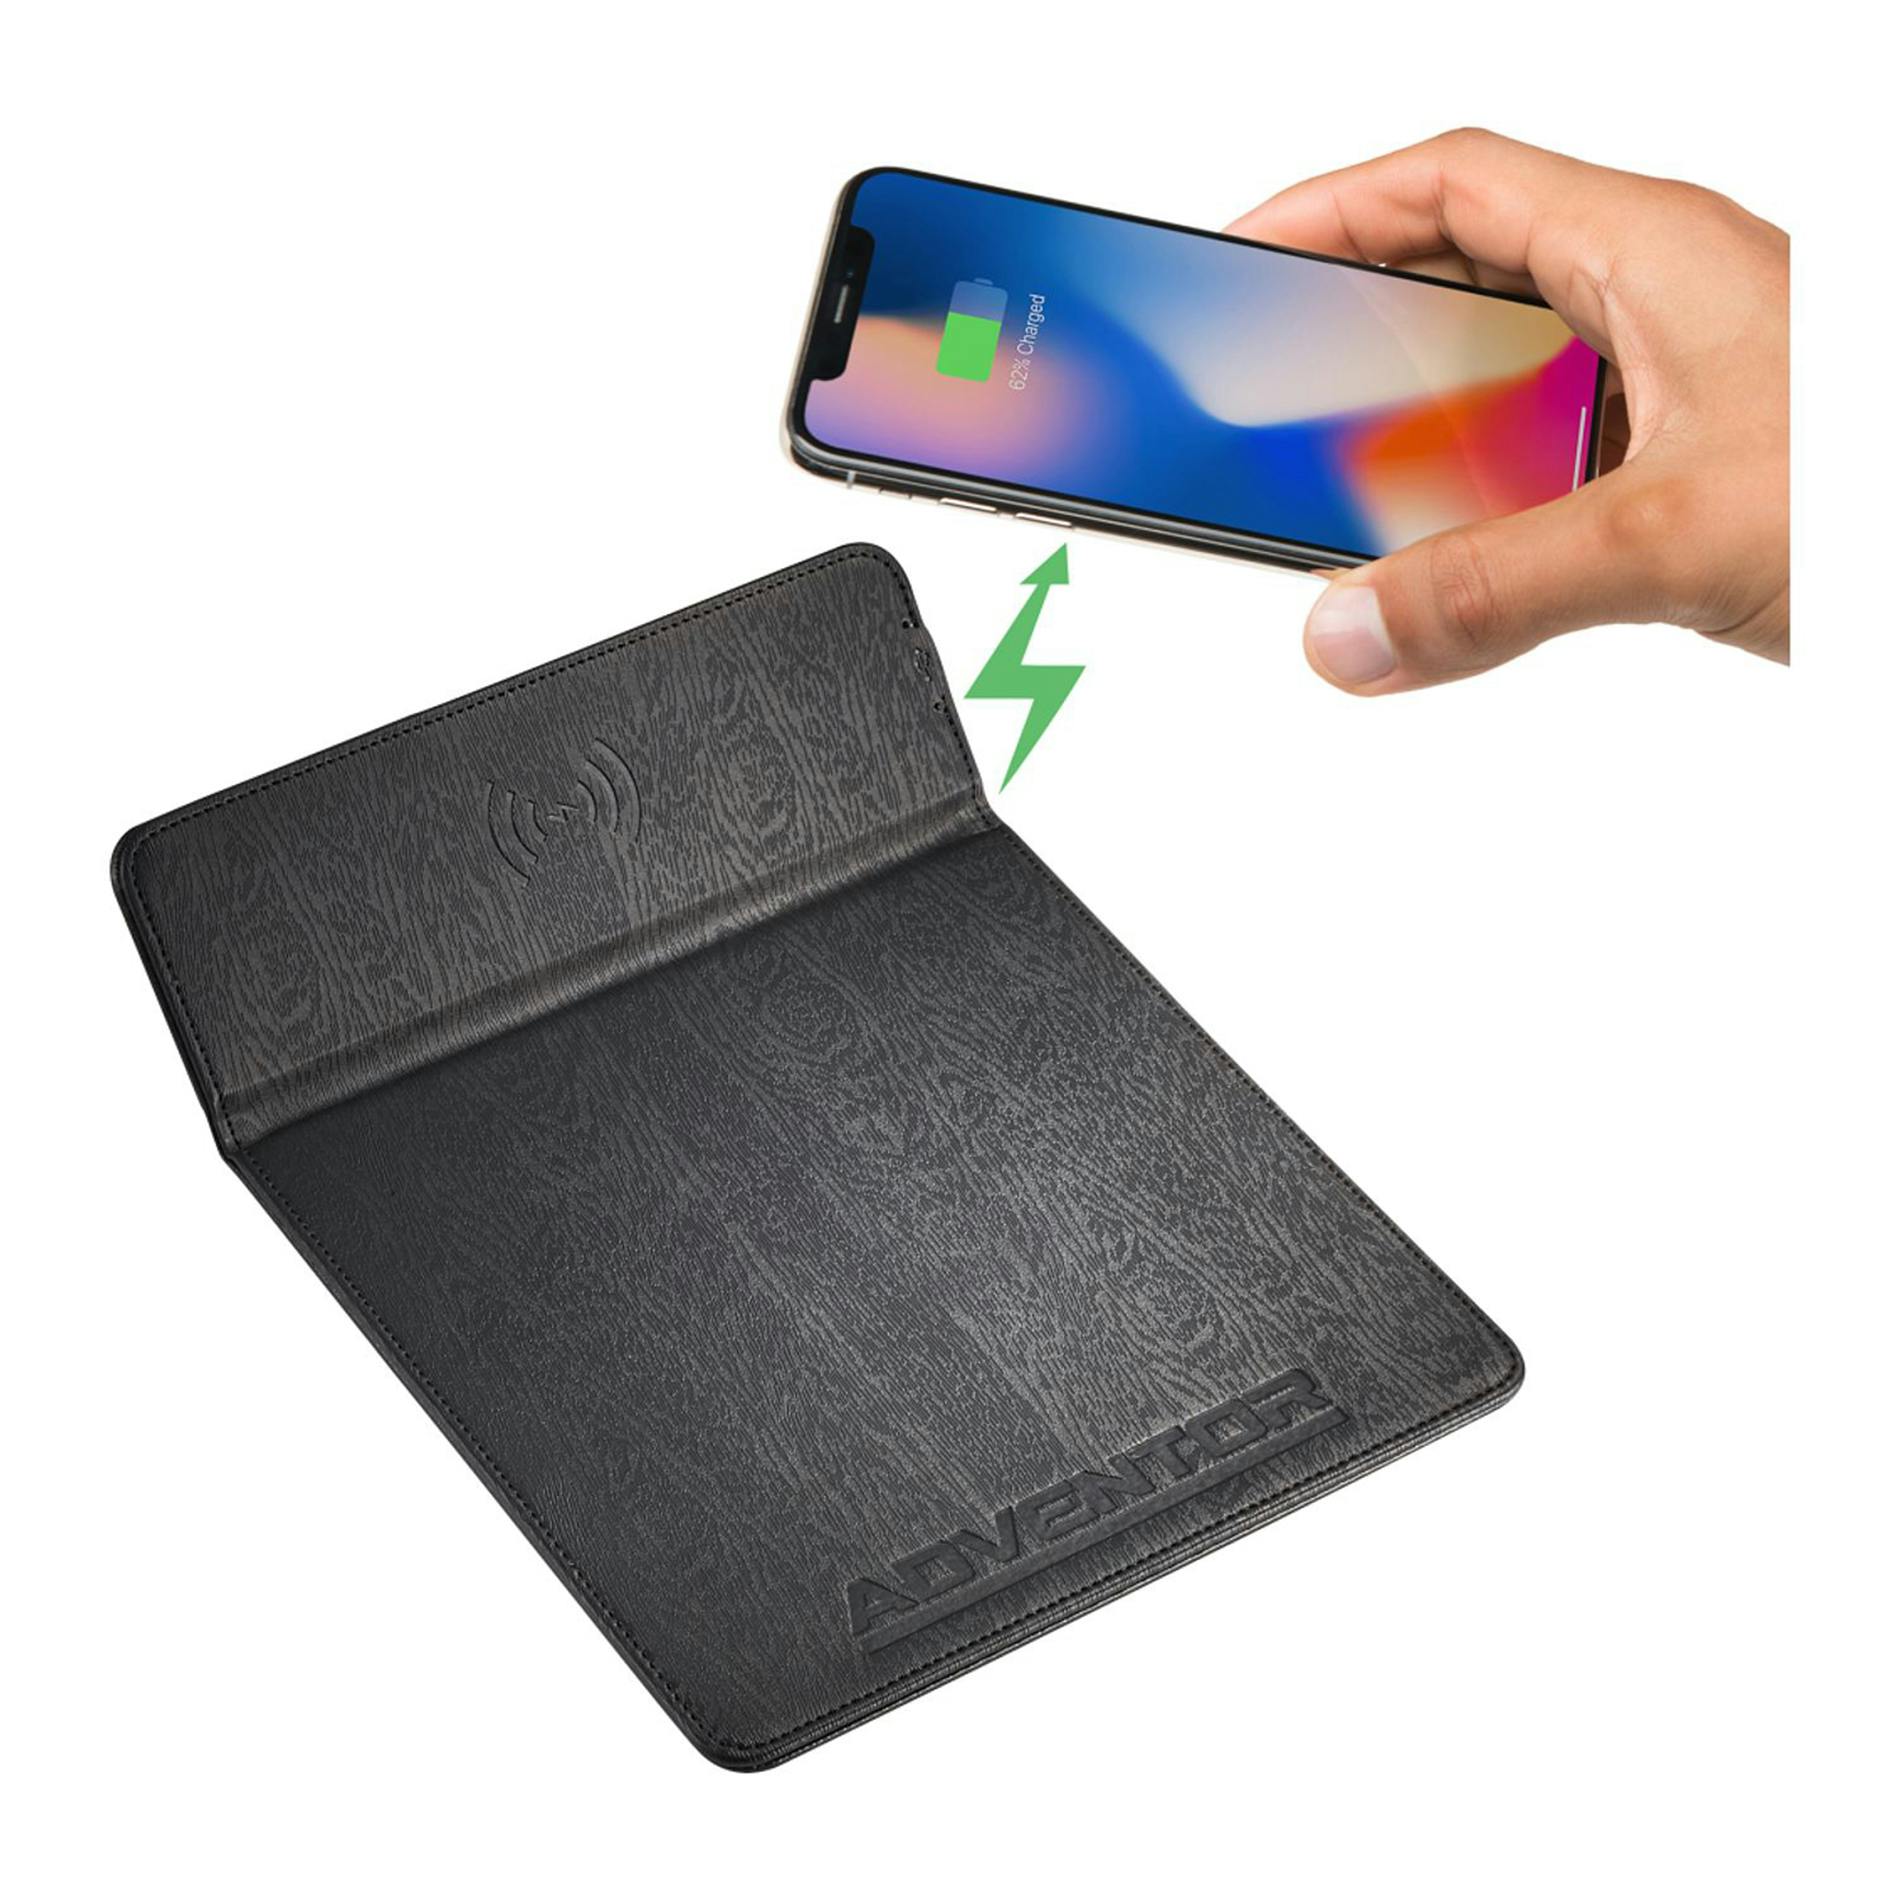 Wireless Charging Mouse Pad - additional Image 3